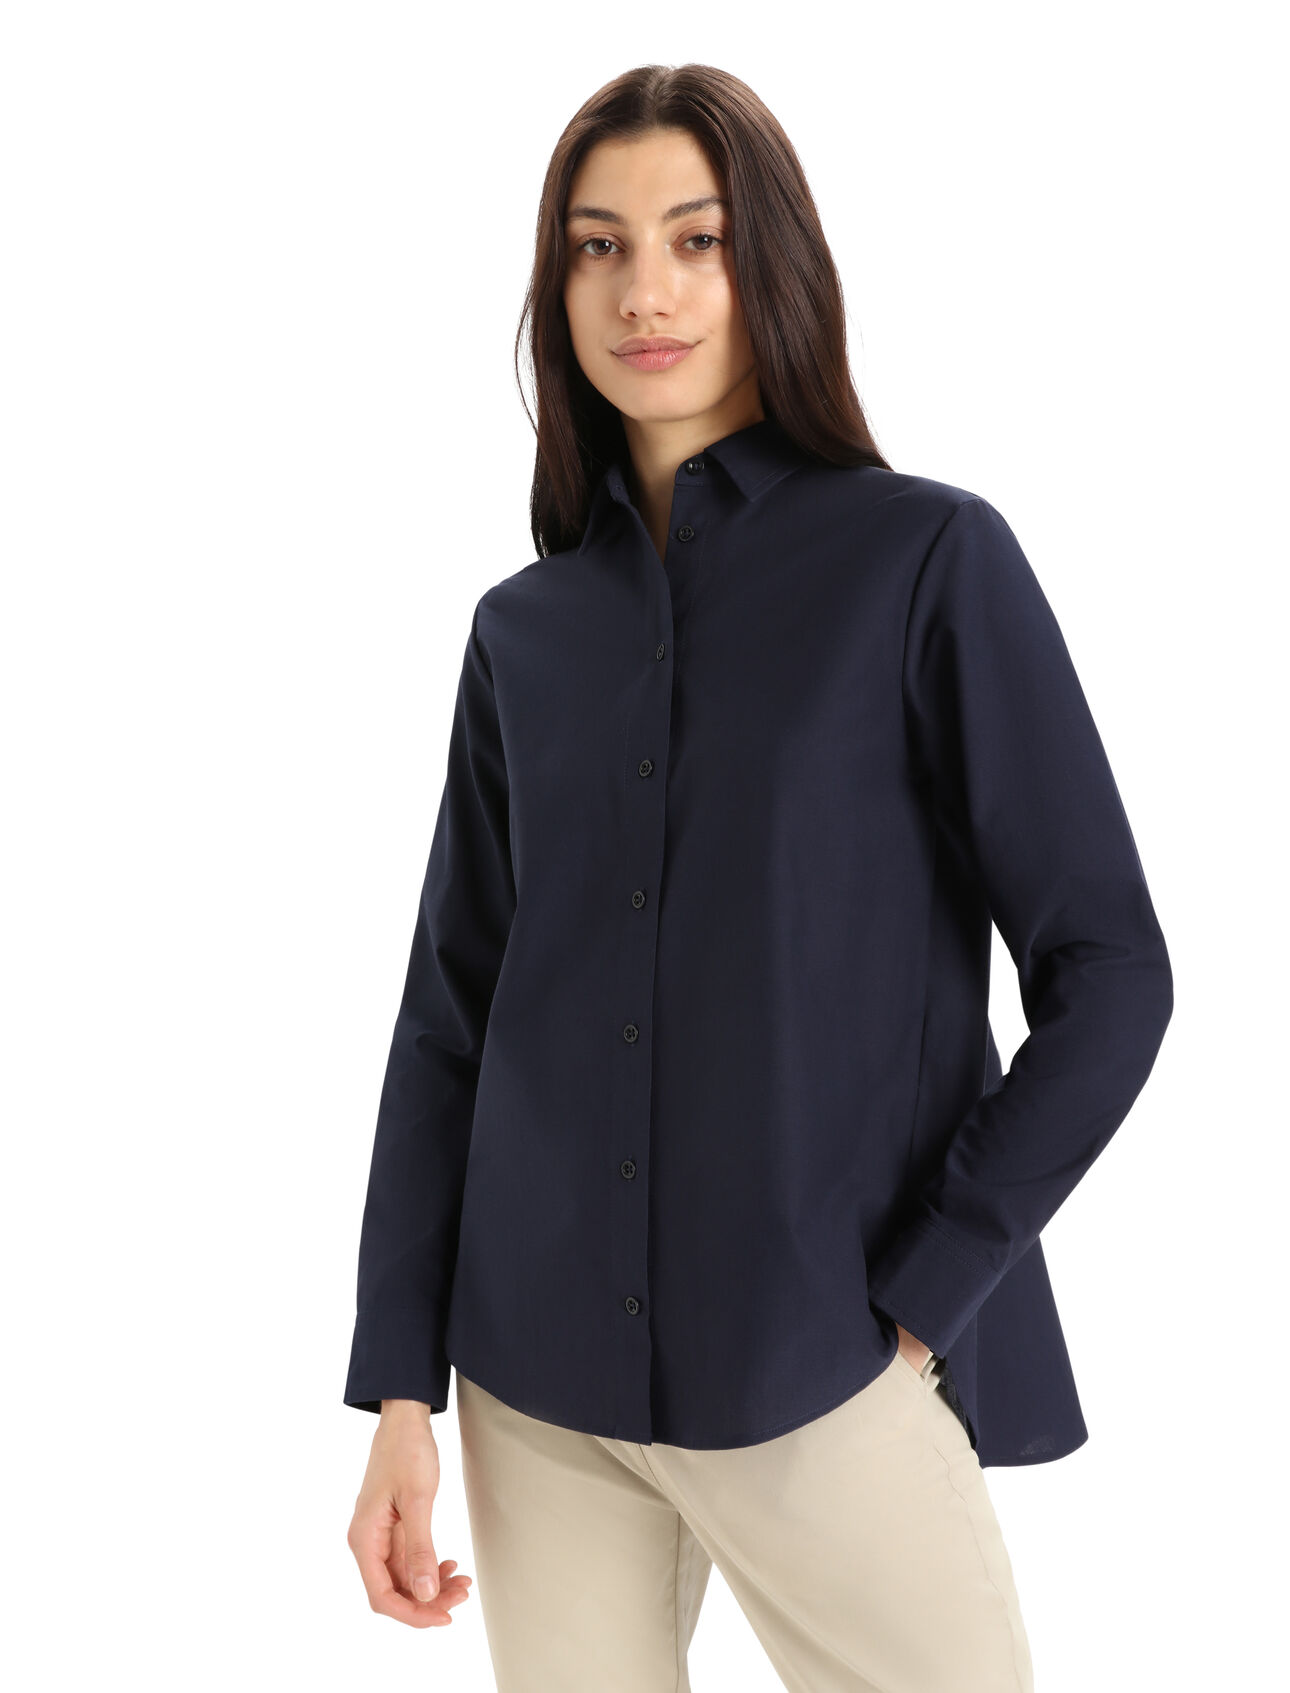 Womens Merino Berlin Long Sleeve Shirt A classic, relaxed-fit collared shirt for everyday comfort, the Berlin Long Sleeve Shirt feature a durable and sustainable blend of all natural merino wool and organic cotton.